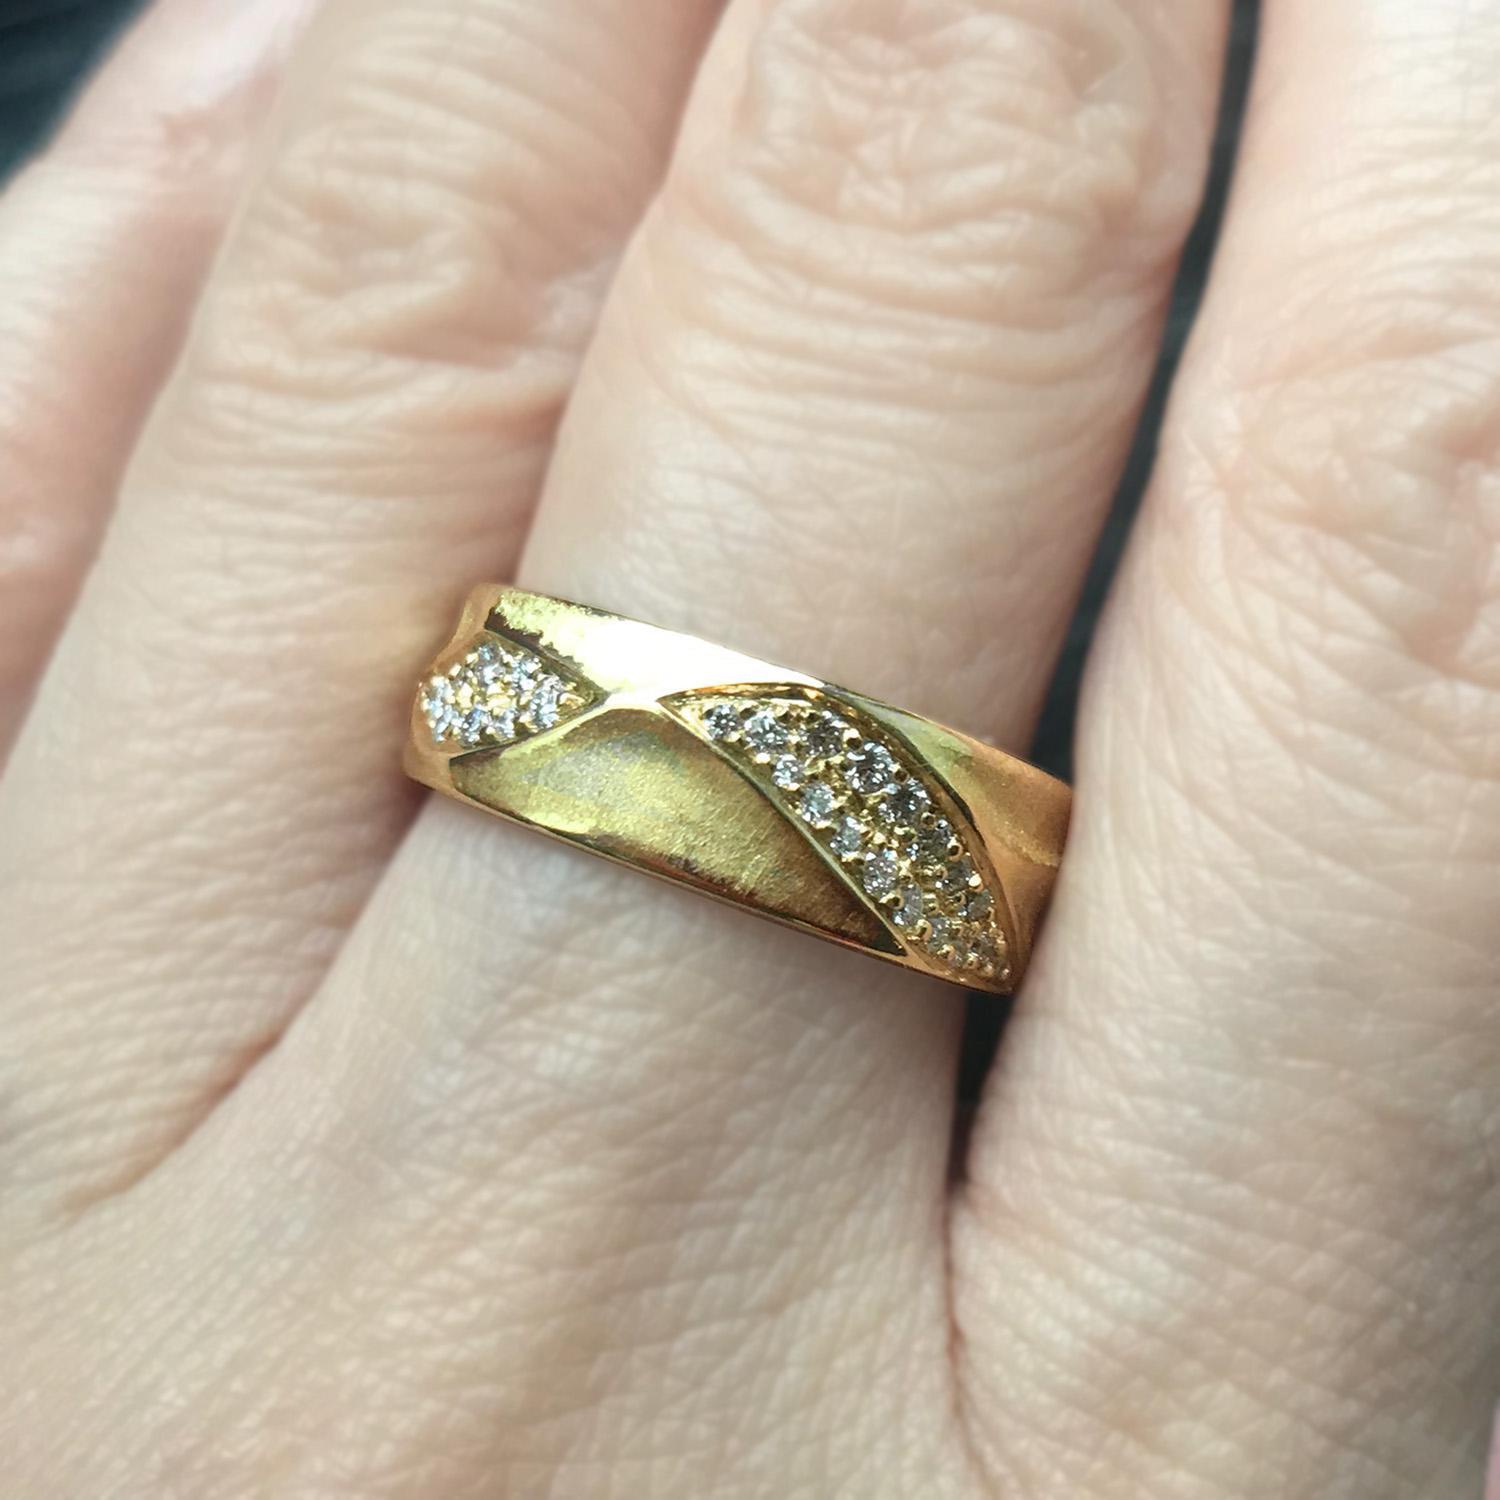 For Sale:  Small 18 Karat Yellow Gold Eternal Dune Band Ring with Diamonds from Keiko Mita 5